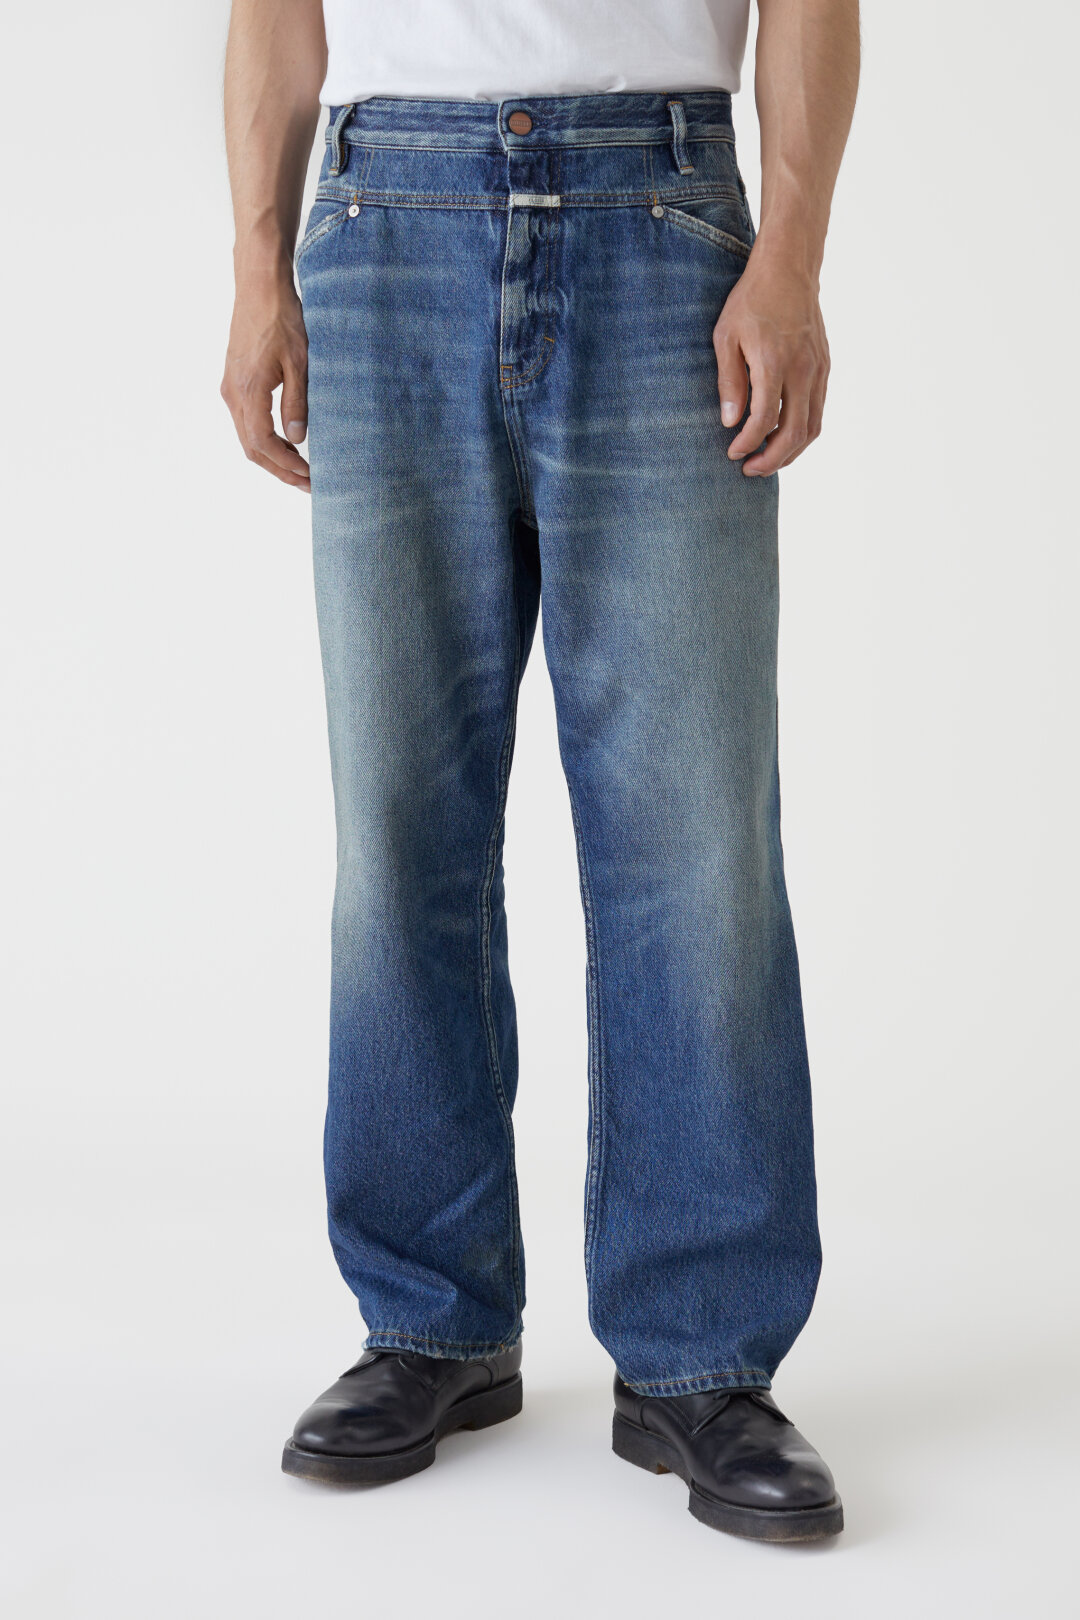 CLOSED X-Treme Loose Jeans in Mid Blue